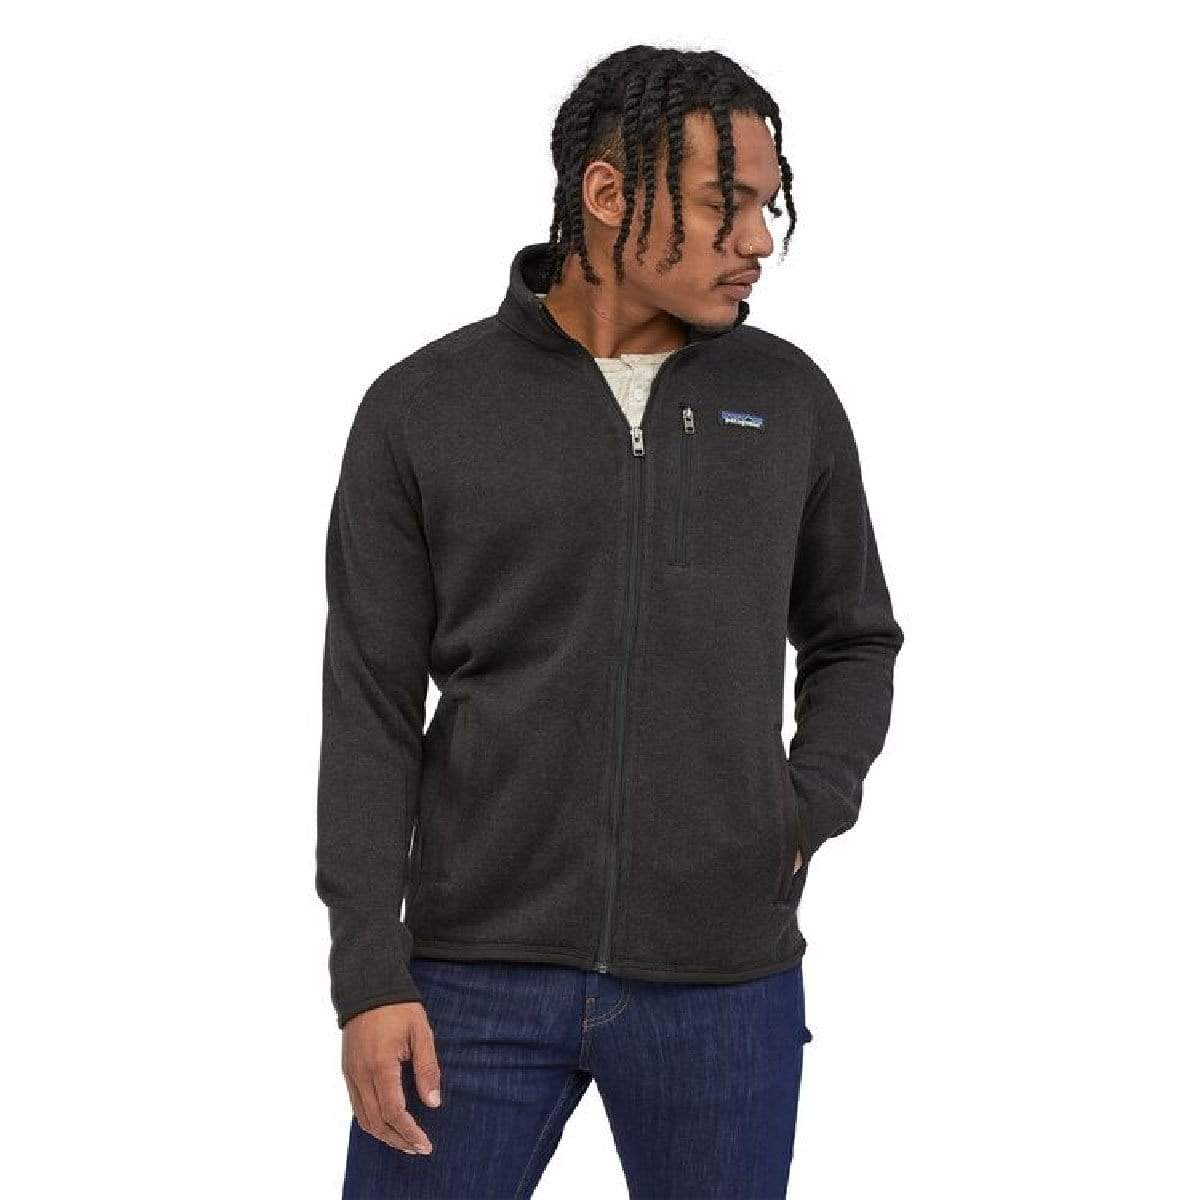 Women's Extreme Sweater Jacket (9480) | Rated for 10°F | RefrigiWear